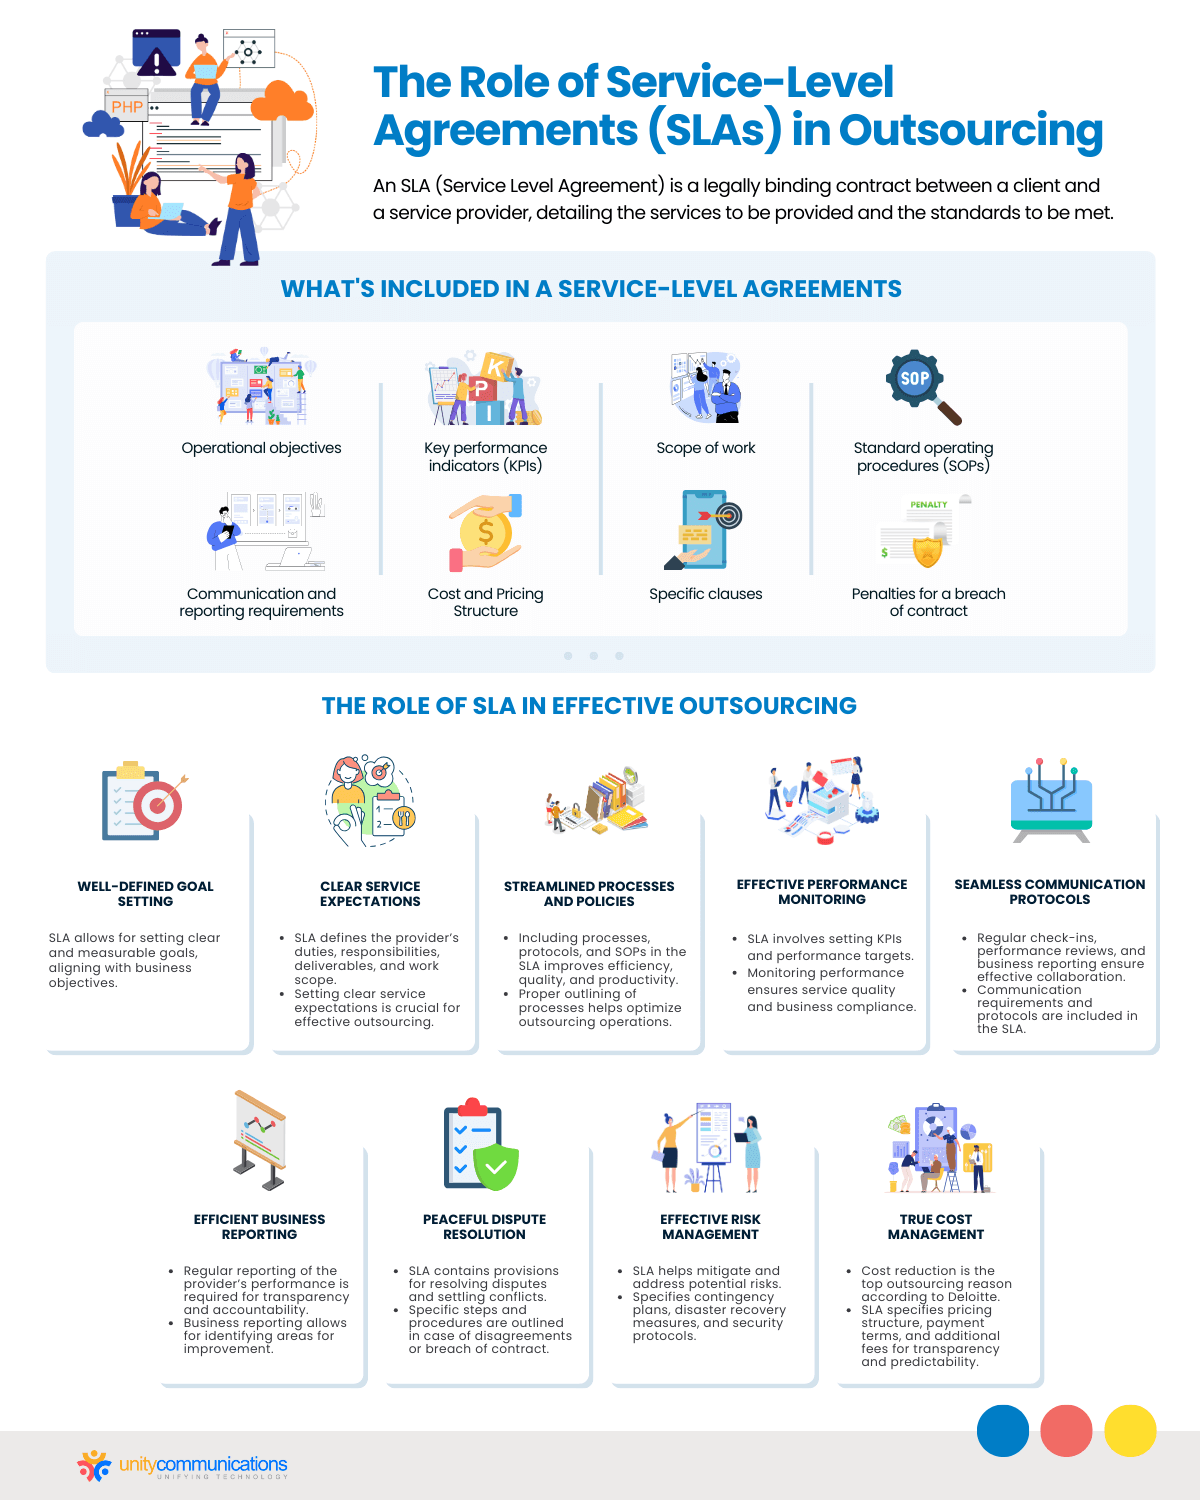 The Role of Service-Level Agreements (SLAs) in Outsourcing - Infographic